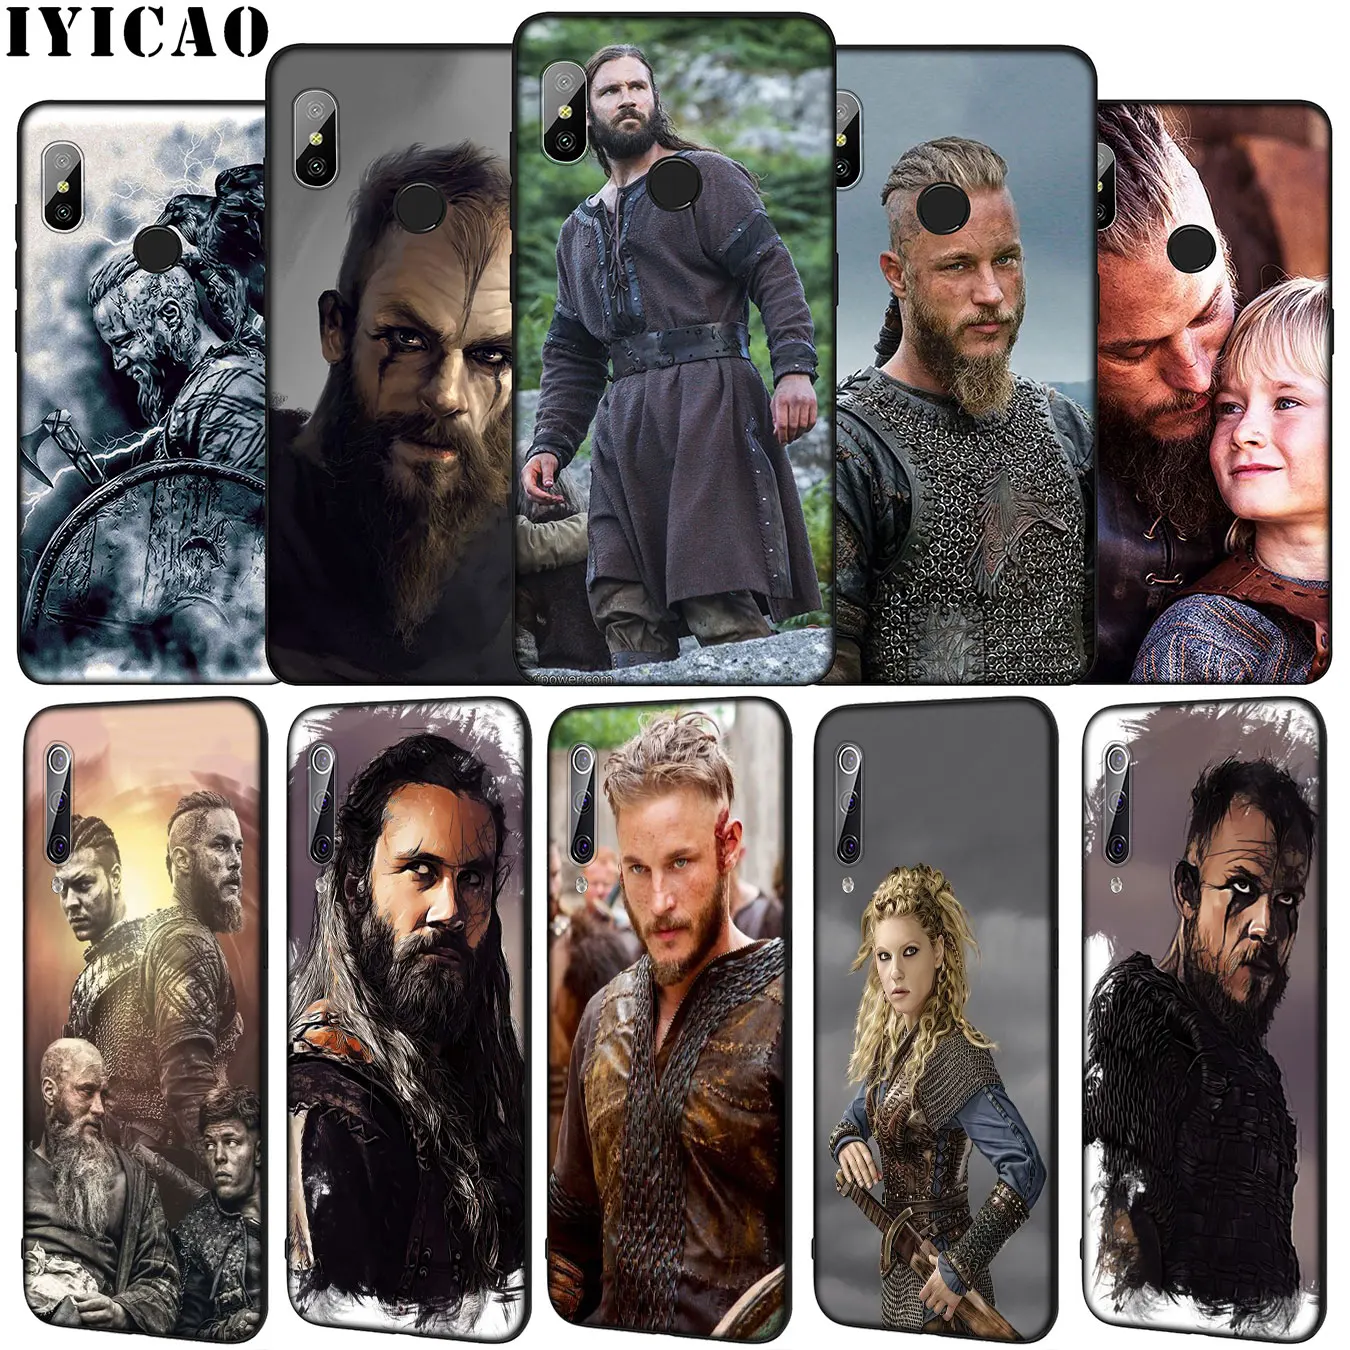 IYICAO Vikings TV show Pattern Soft Silicone Case for Xiaomi Mi 10 9 9T A3 Pro 8 SE A2 Lite A1 CC9 CC9E 6 pocophone f1 Mi10 | Мобильные